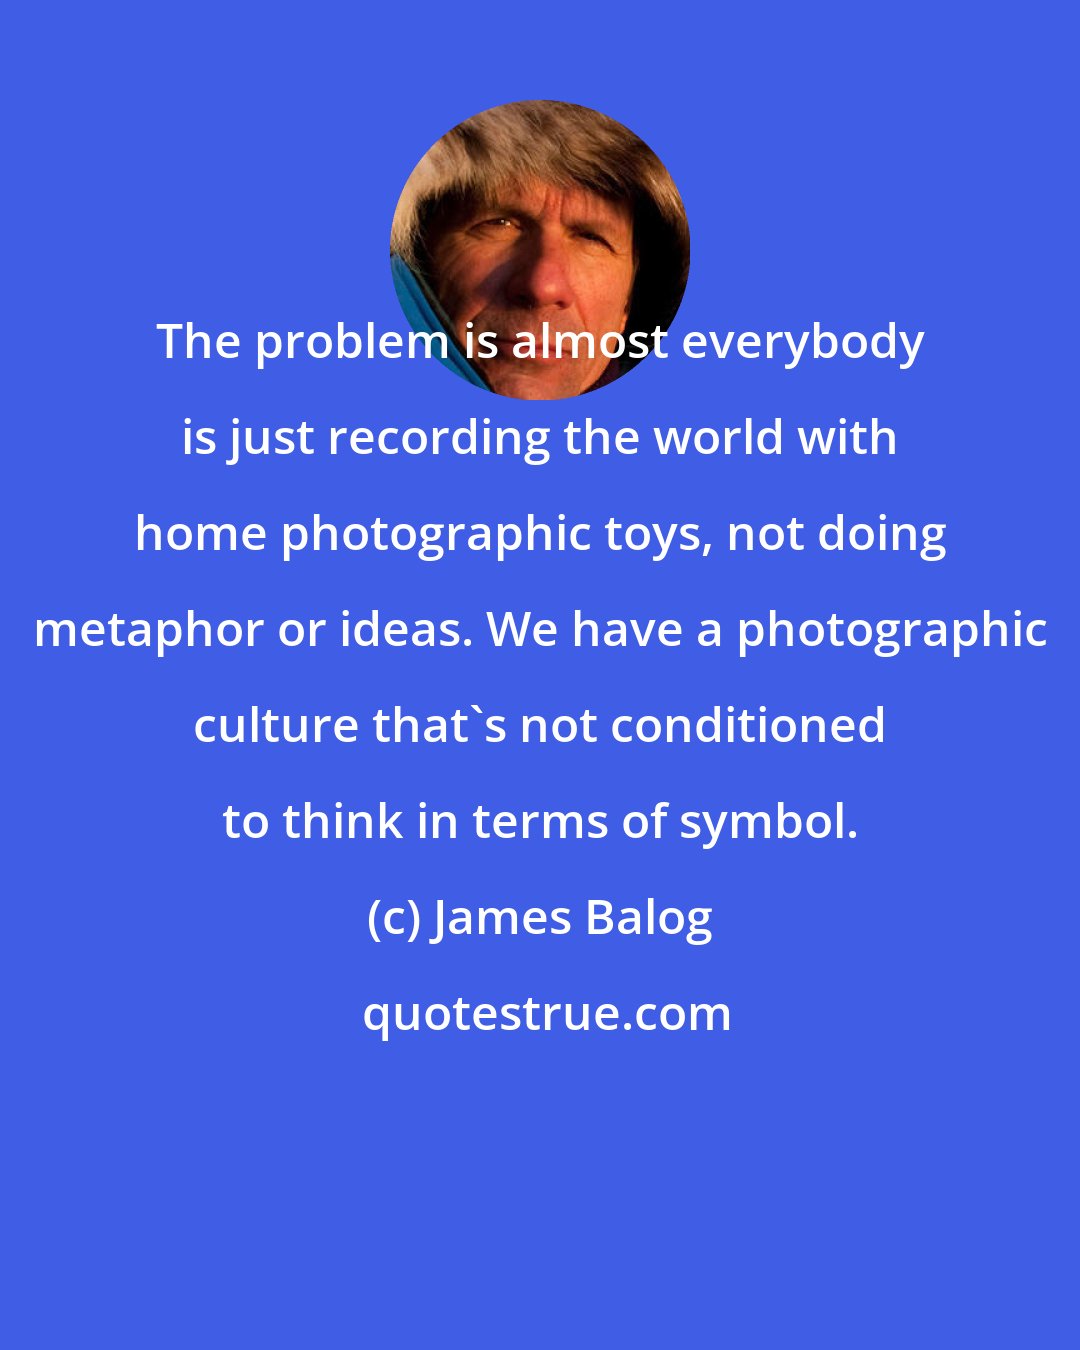 James Balog: The problem is almost everybody is just recording the world with home photographic toys, not doing metaphor or ideas. We have a photographic culture that's not conditioned to think in terms of symbol.